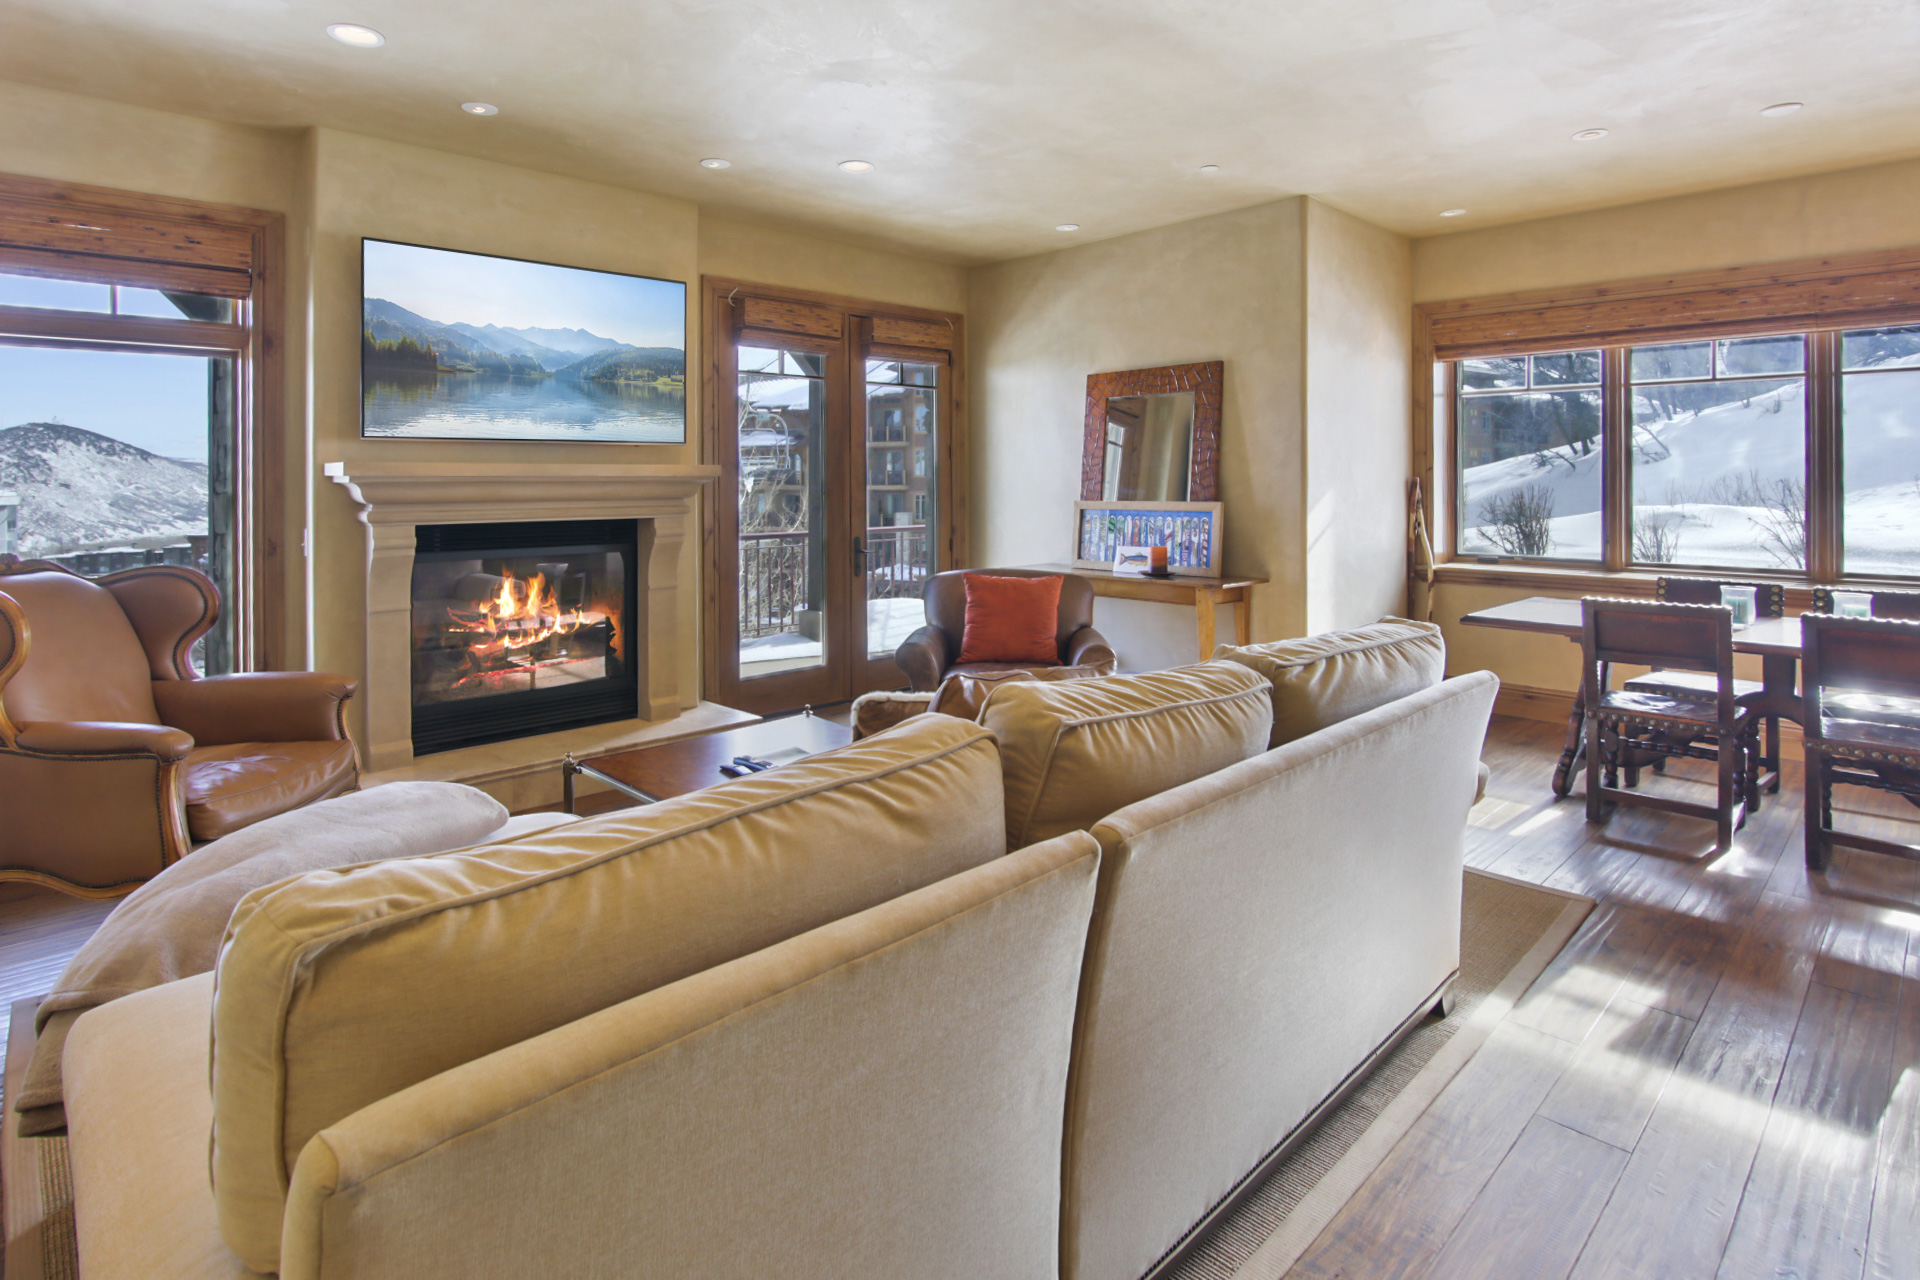 Living room with views of ski trails